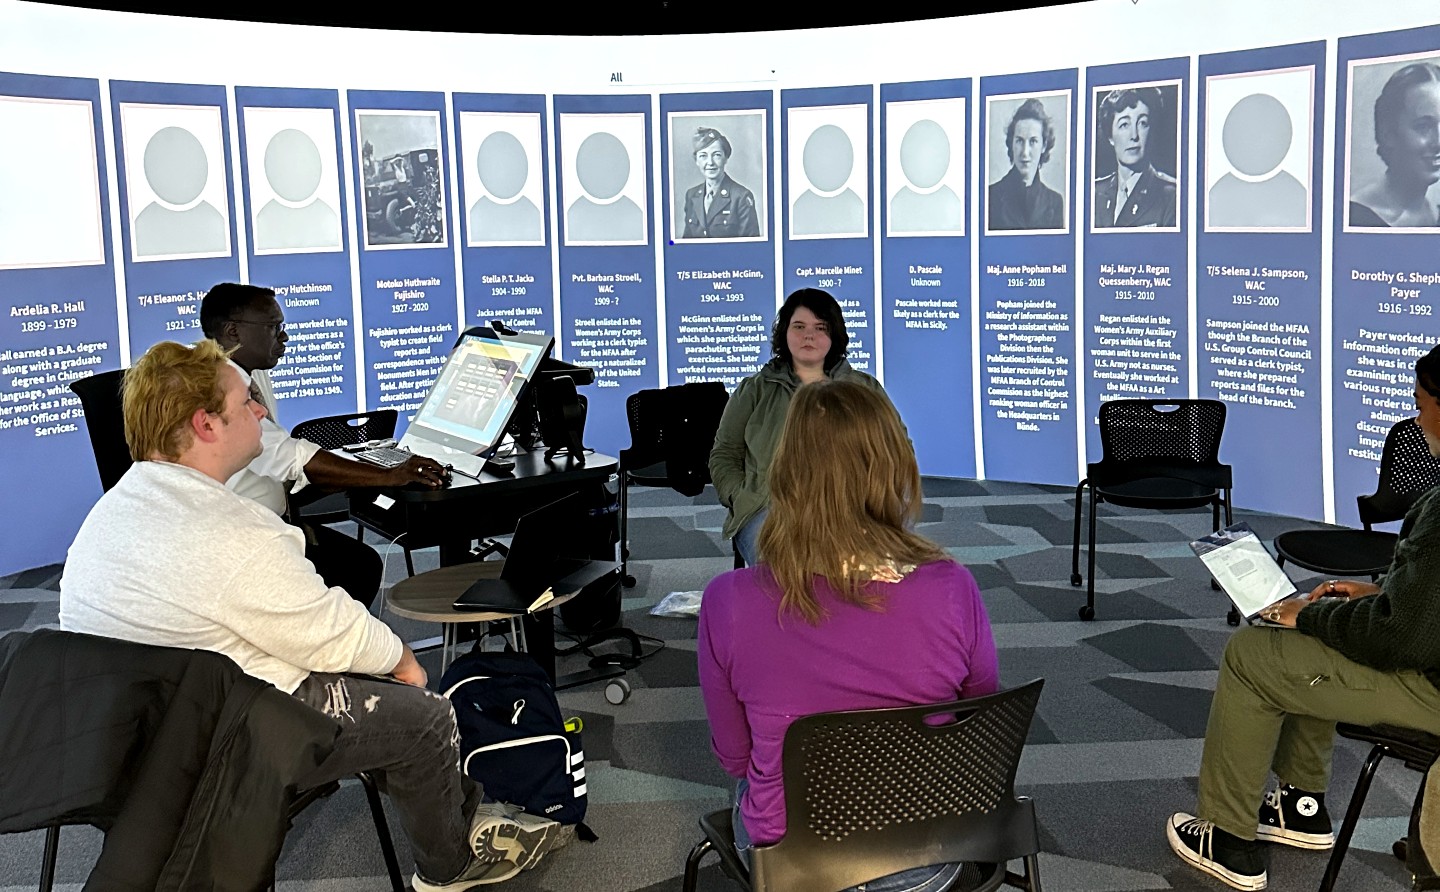 Class works in the the 360 Degree Visualization Room, surrounded by images and text related to the women they were studying